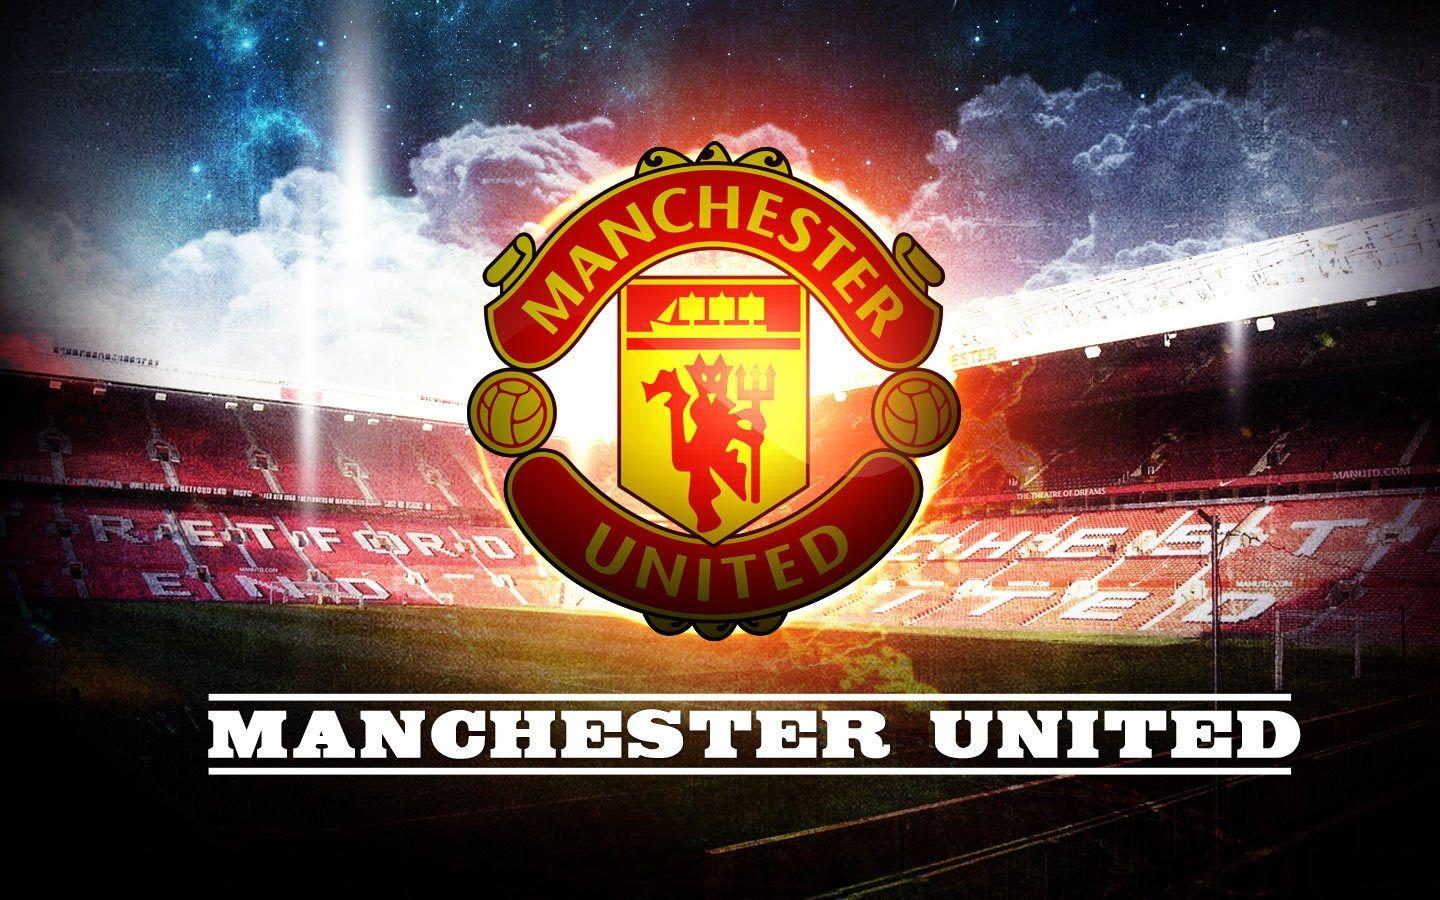 Manchester United Logo Football Club Wallpaper For PC